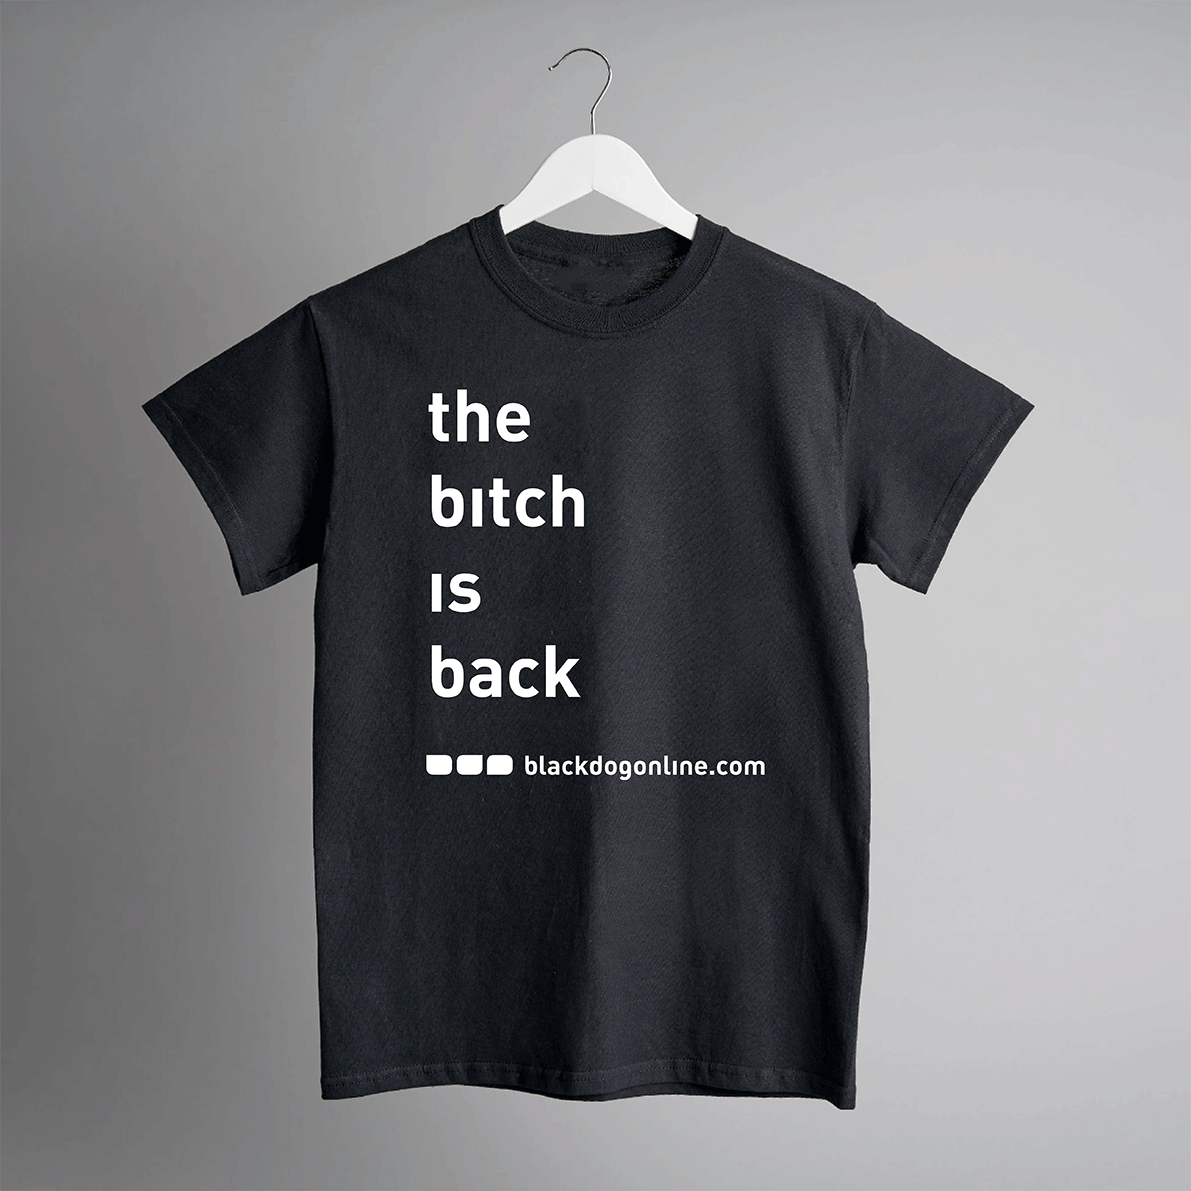 the bitch is back t-shirt